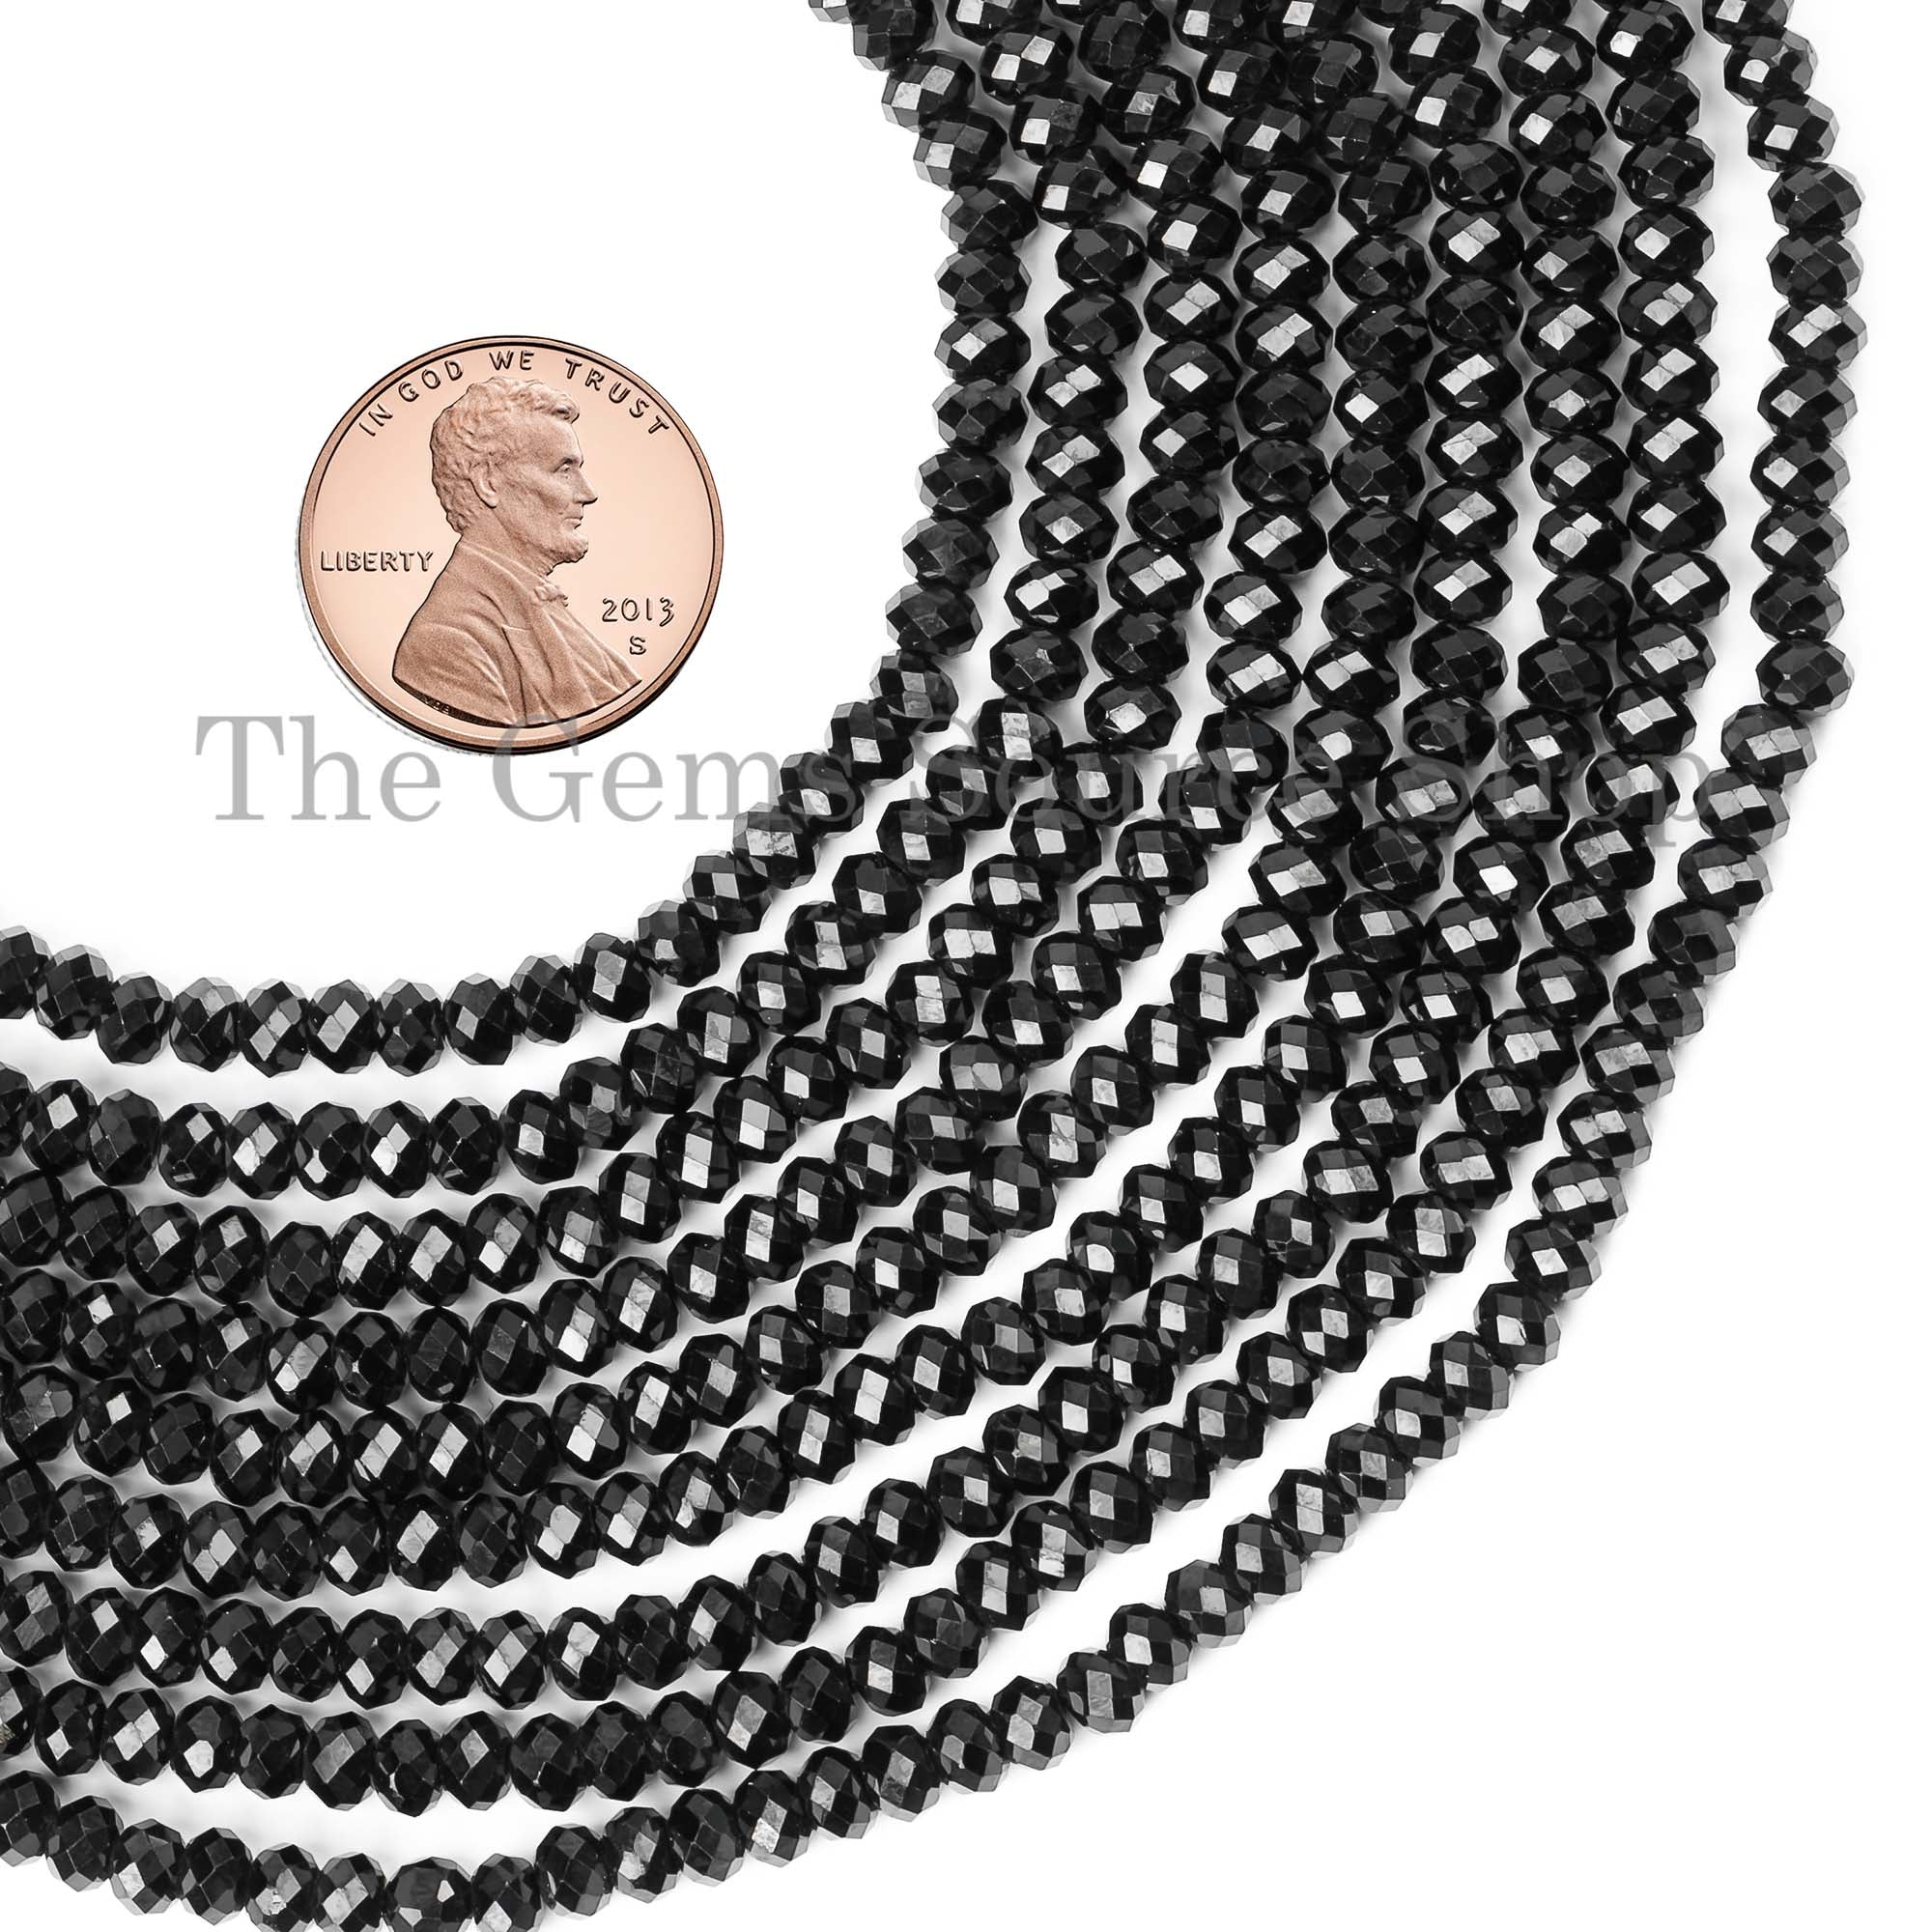 Black Spinel Beads, Black Spinel Faceted Beads, Black Spinel Rondelle Shape Beads, Wholesale Beads